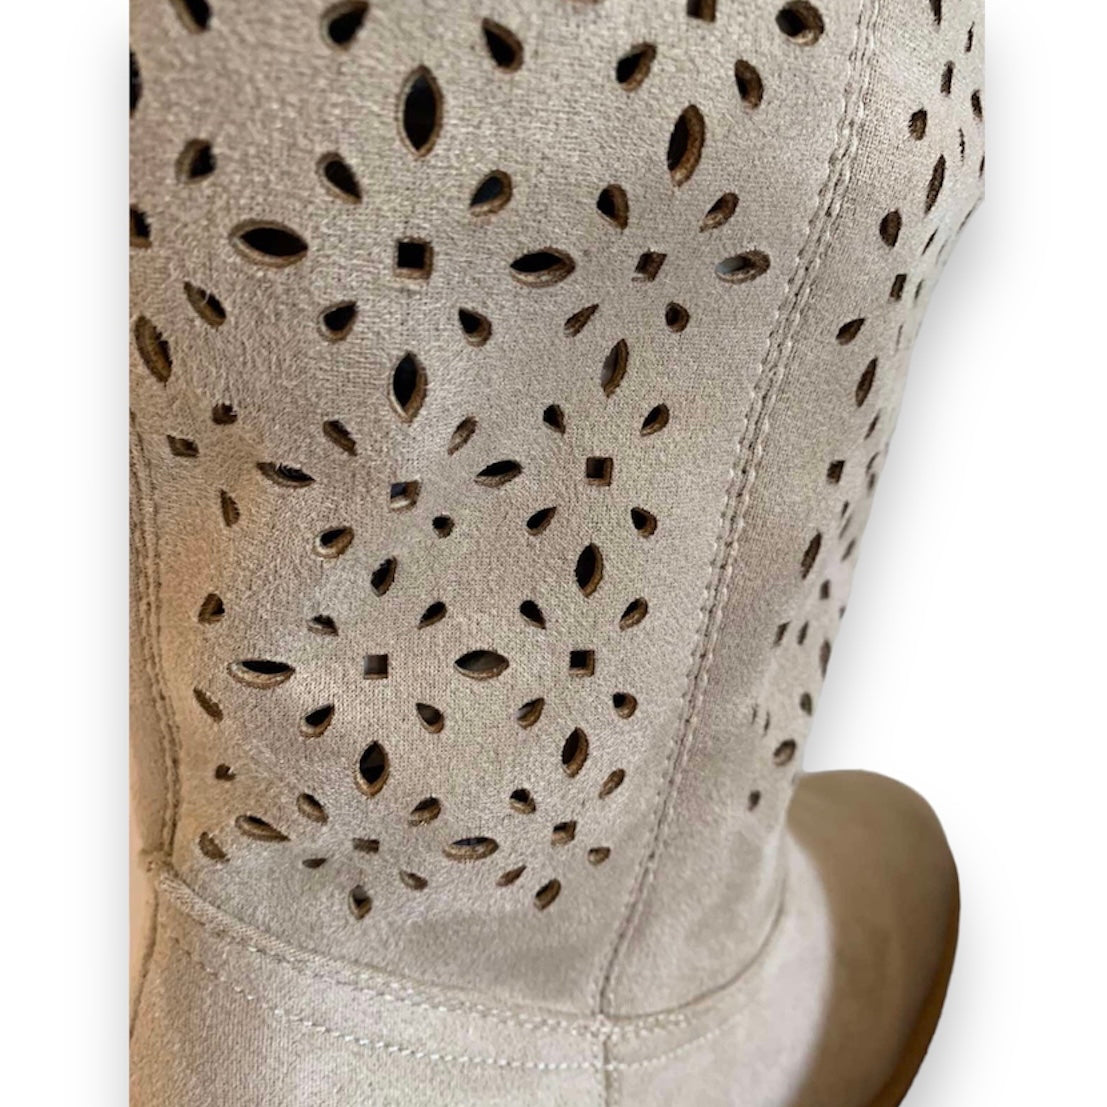 MALIEN PERFORATED NUDE BOOTS